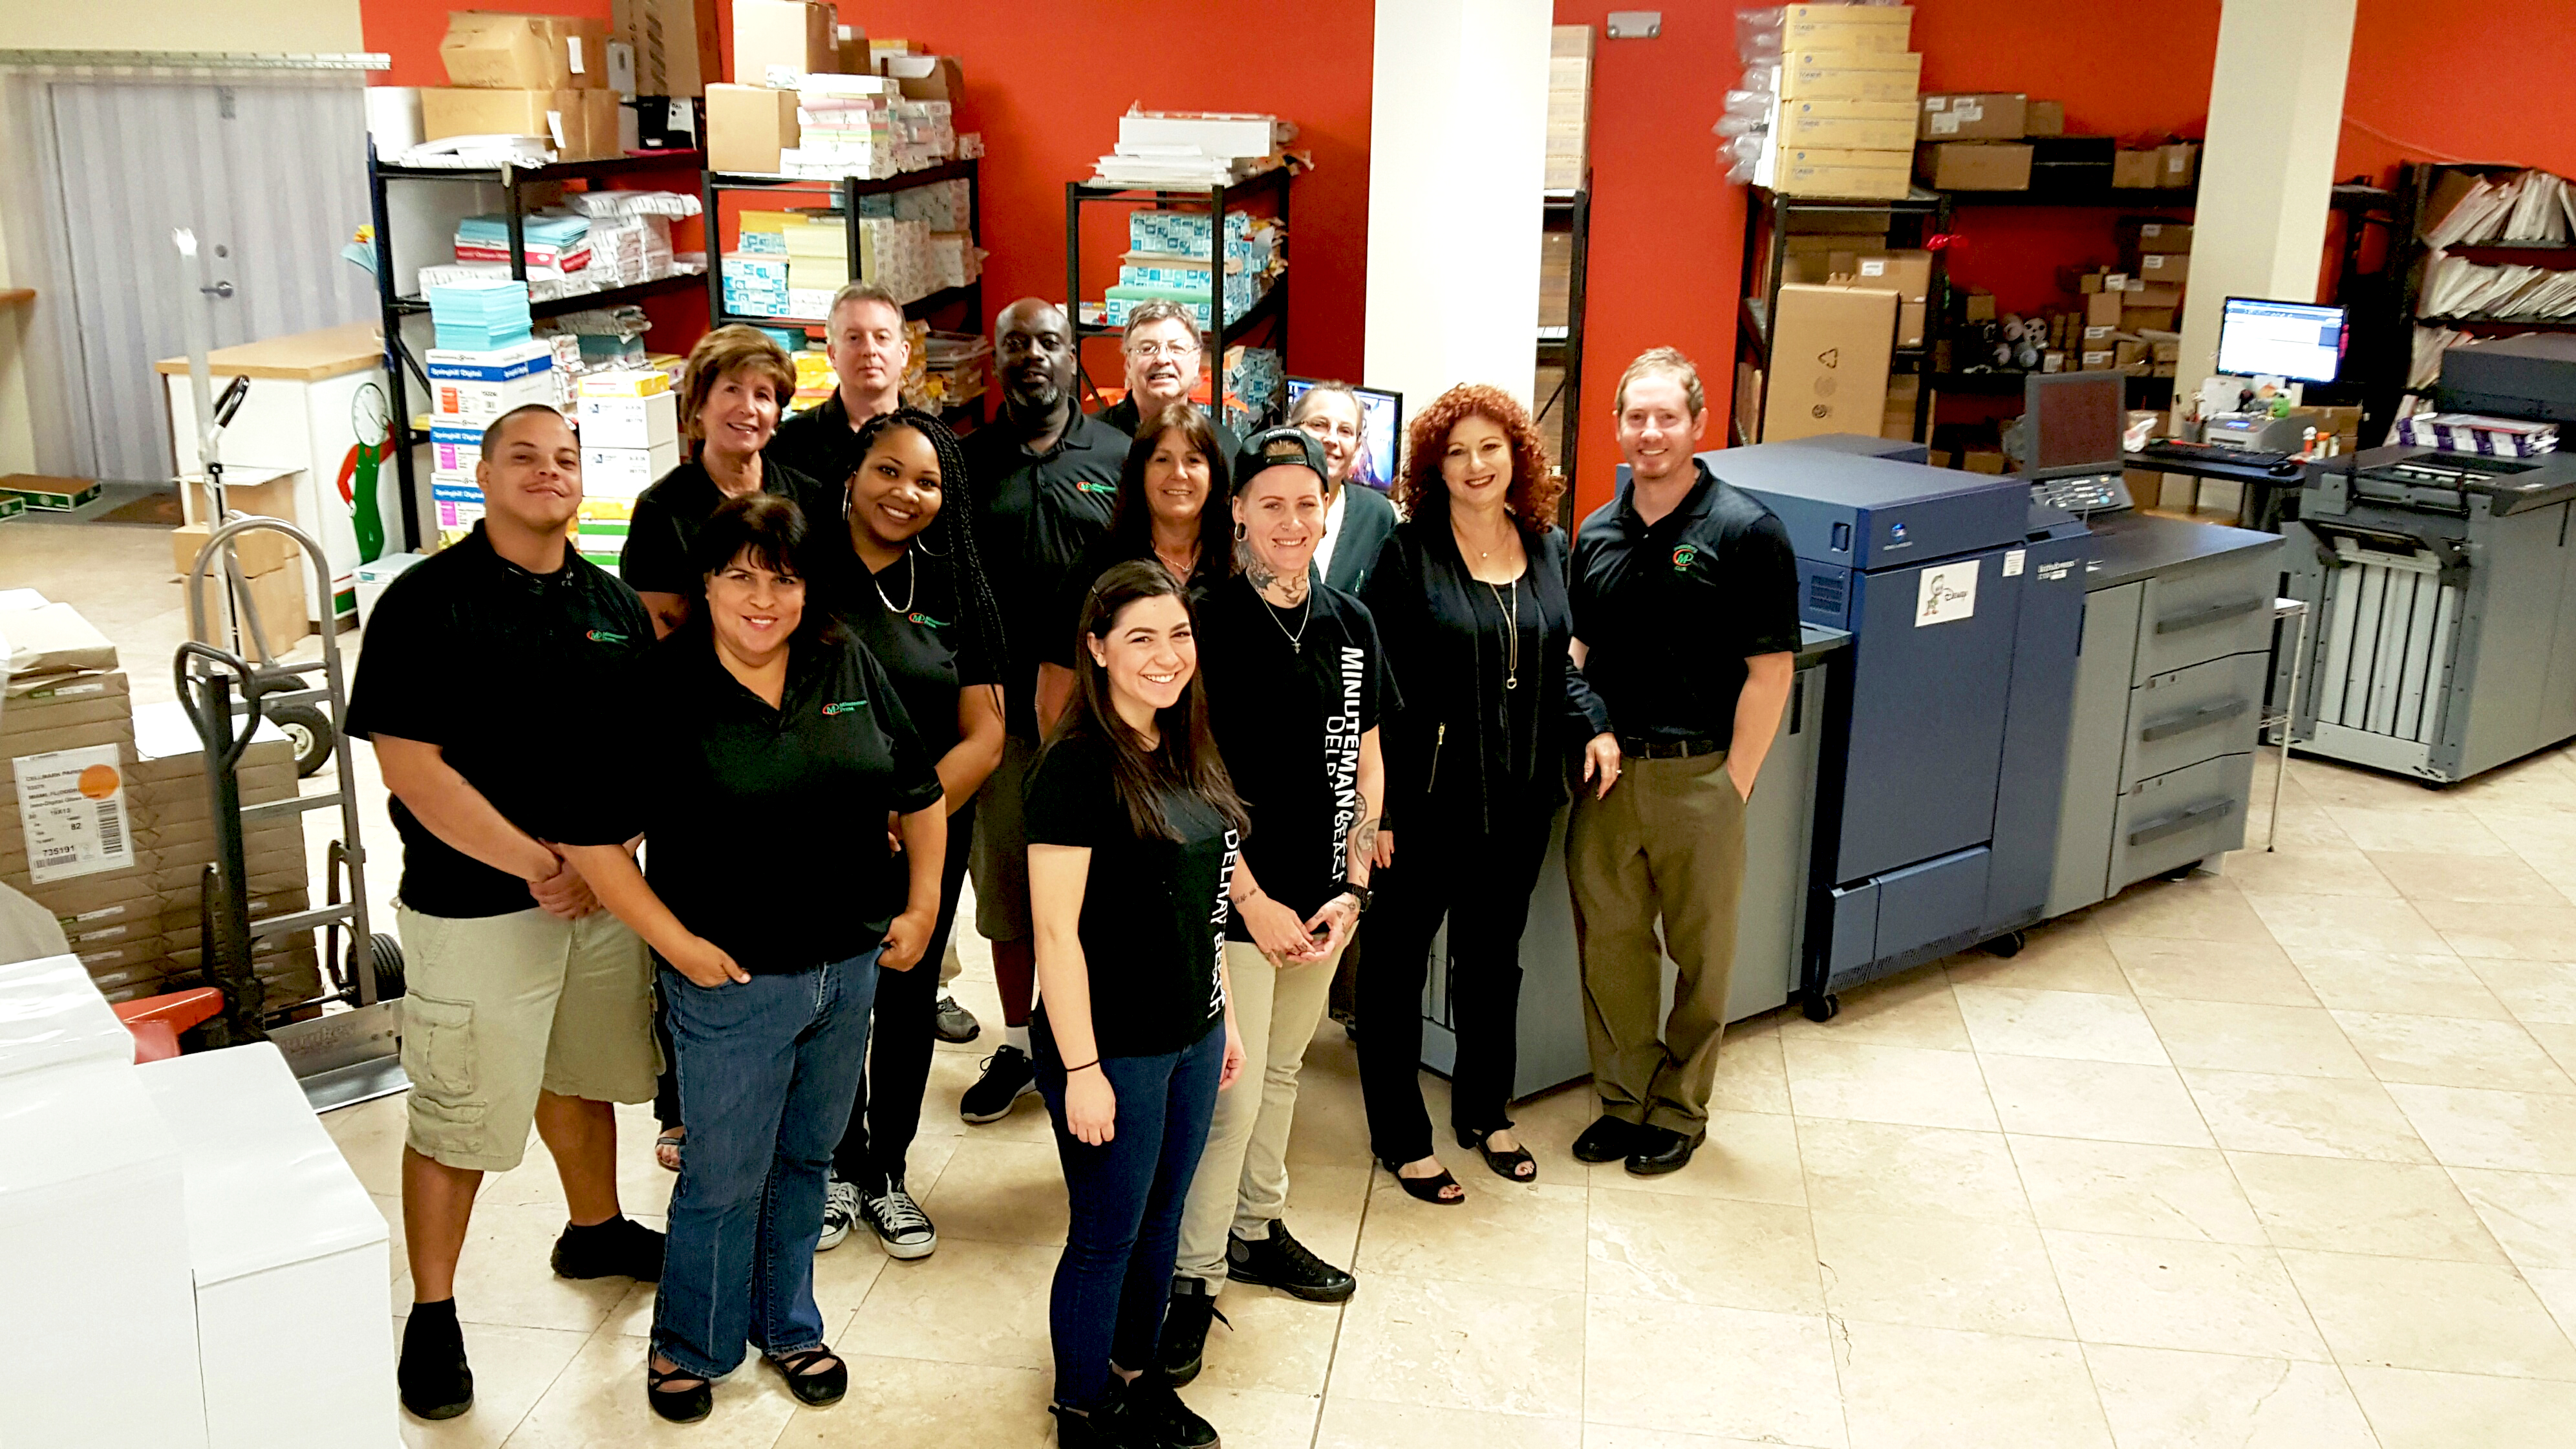 The Minuteman Press franchise staff in Delray Beach love their two Konica Minolta bizhub PRESS® 1100s. Pictured from left to right are: Josh, Idie, Julie, Shennel, Angelo, Melissa, Reggie, Carmen, James, Ricky, Linda, Gail, and owner Matthew Perry.